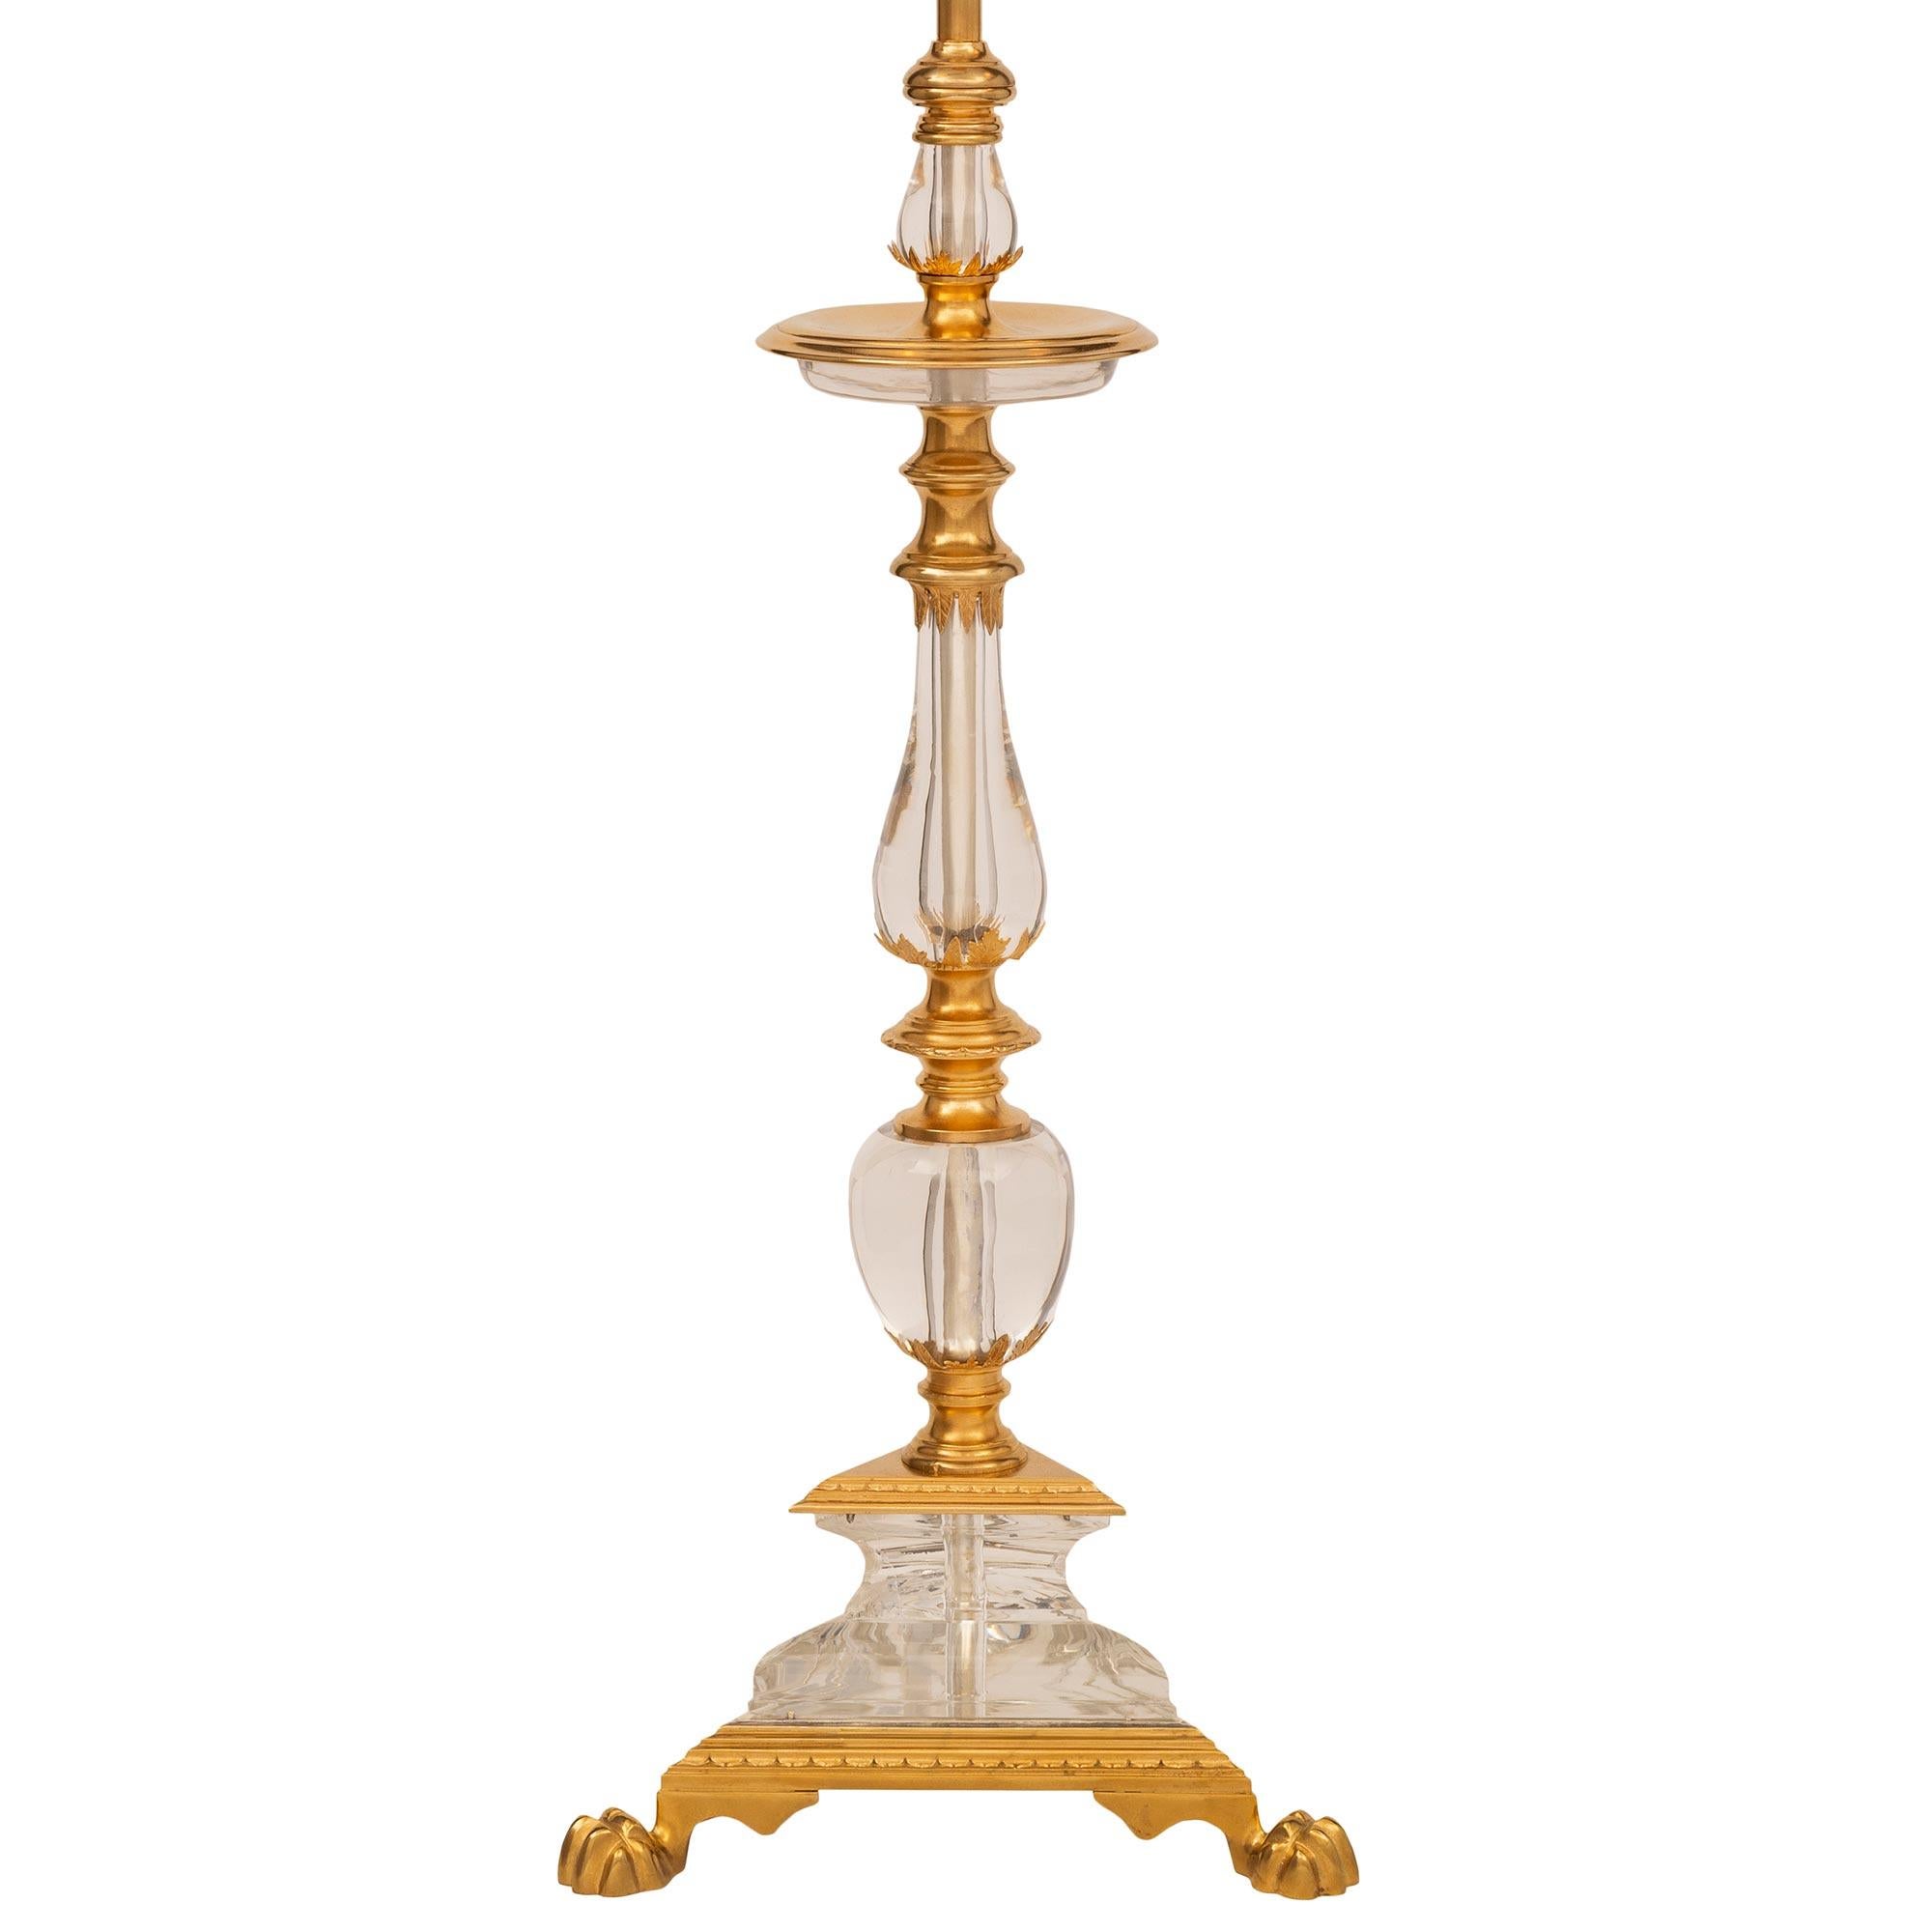 A unique and extremely elegant French 19th century Louis XVI st. ormolu and Baccarat crystal lamp. The lamp is raised by a striking and most decorative triangular base with a fine mottled wrap around ormolu band, handsome richly chased paw feet, and